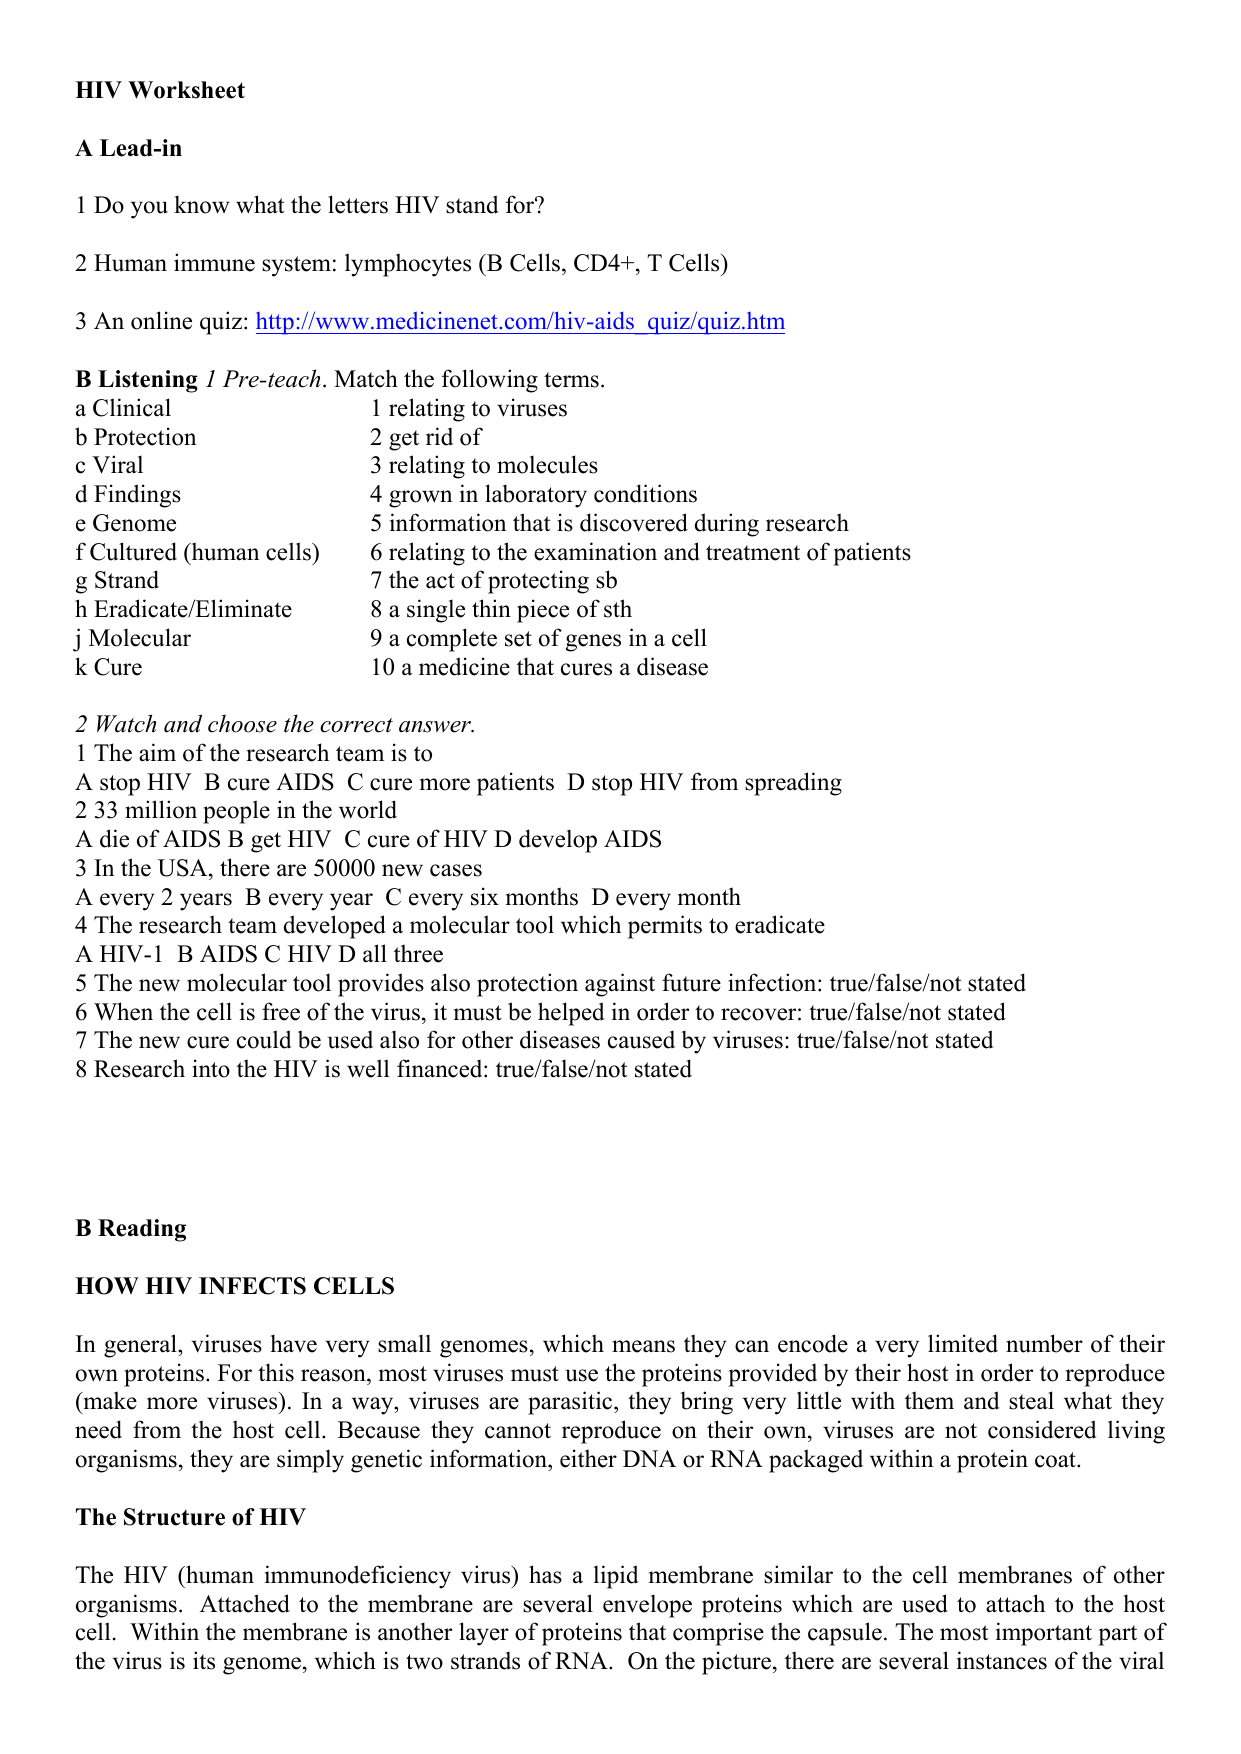 how-hiv-infects-cells-worksheet-answer-key-islero-guide-answer-for-assignment